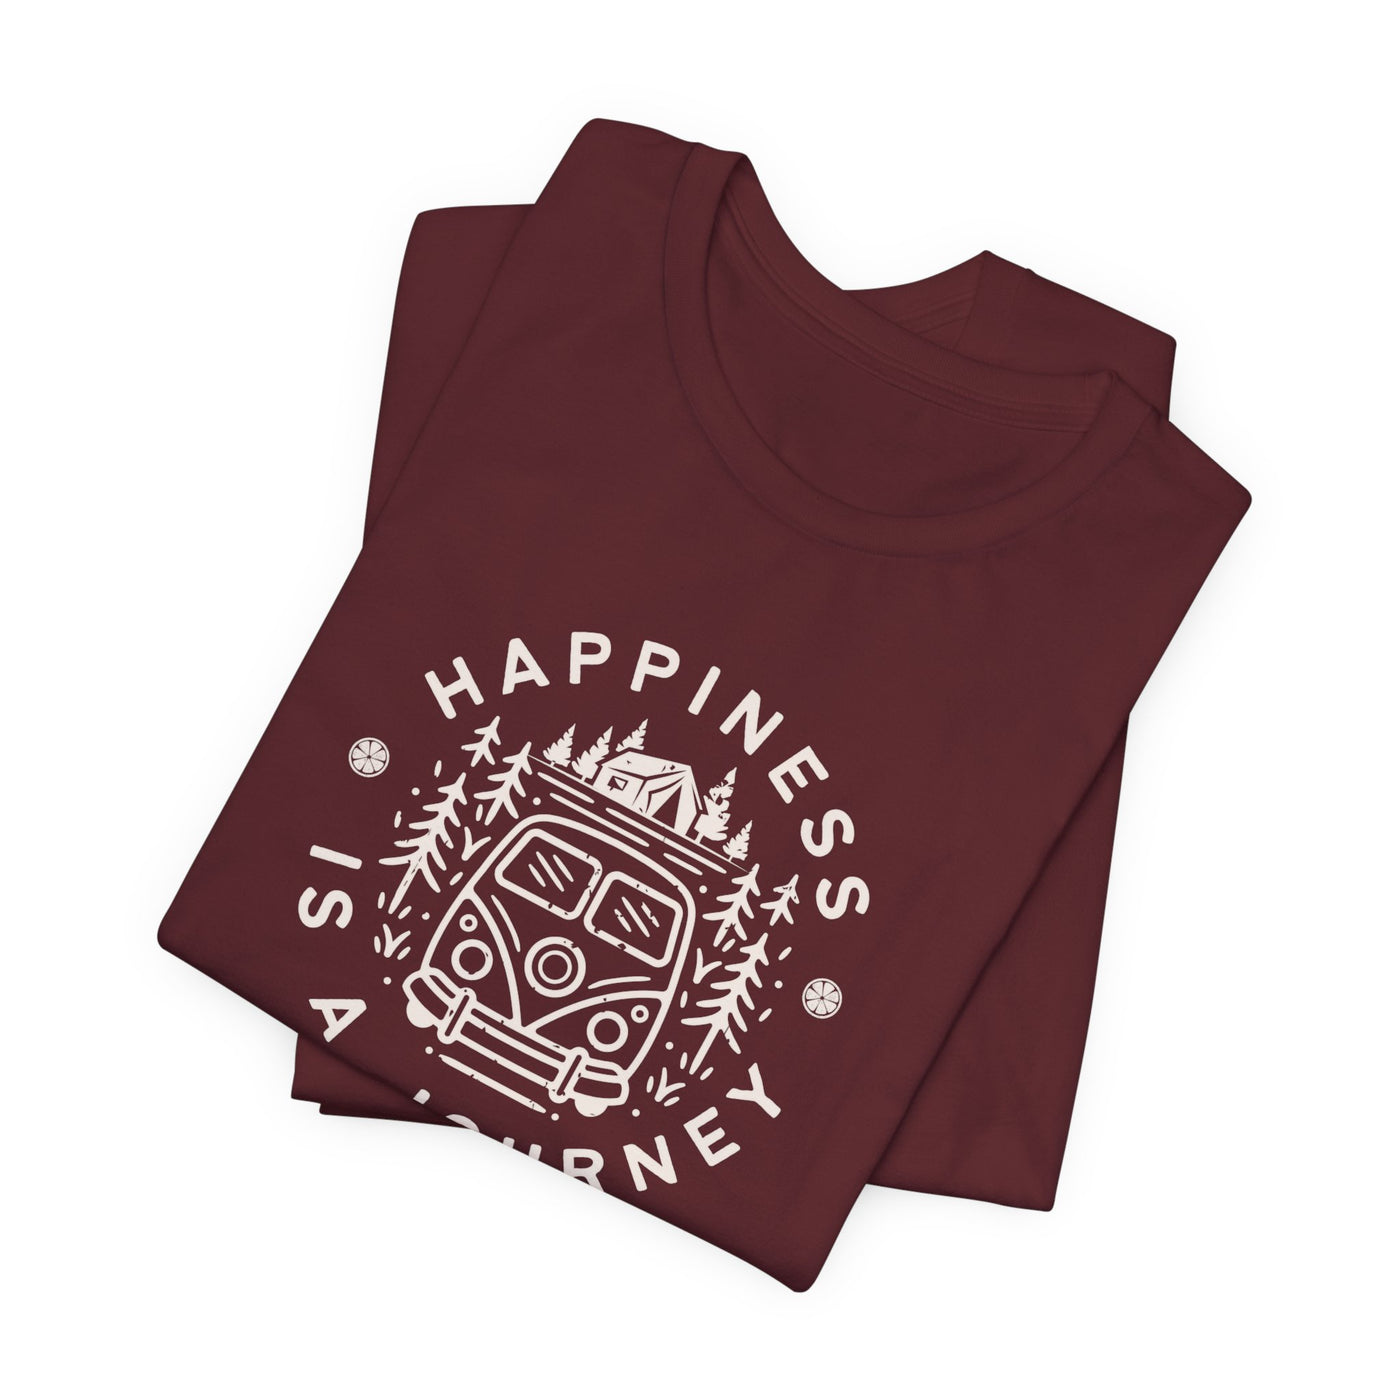 🔥 Happiness is a Journey Cozy T-Shirt